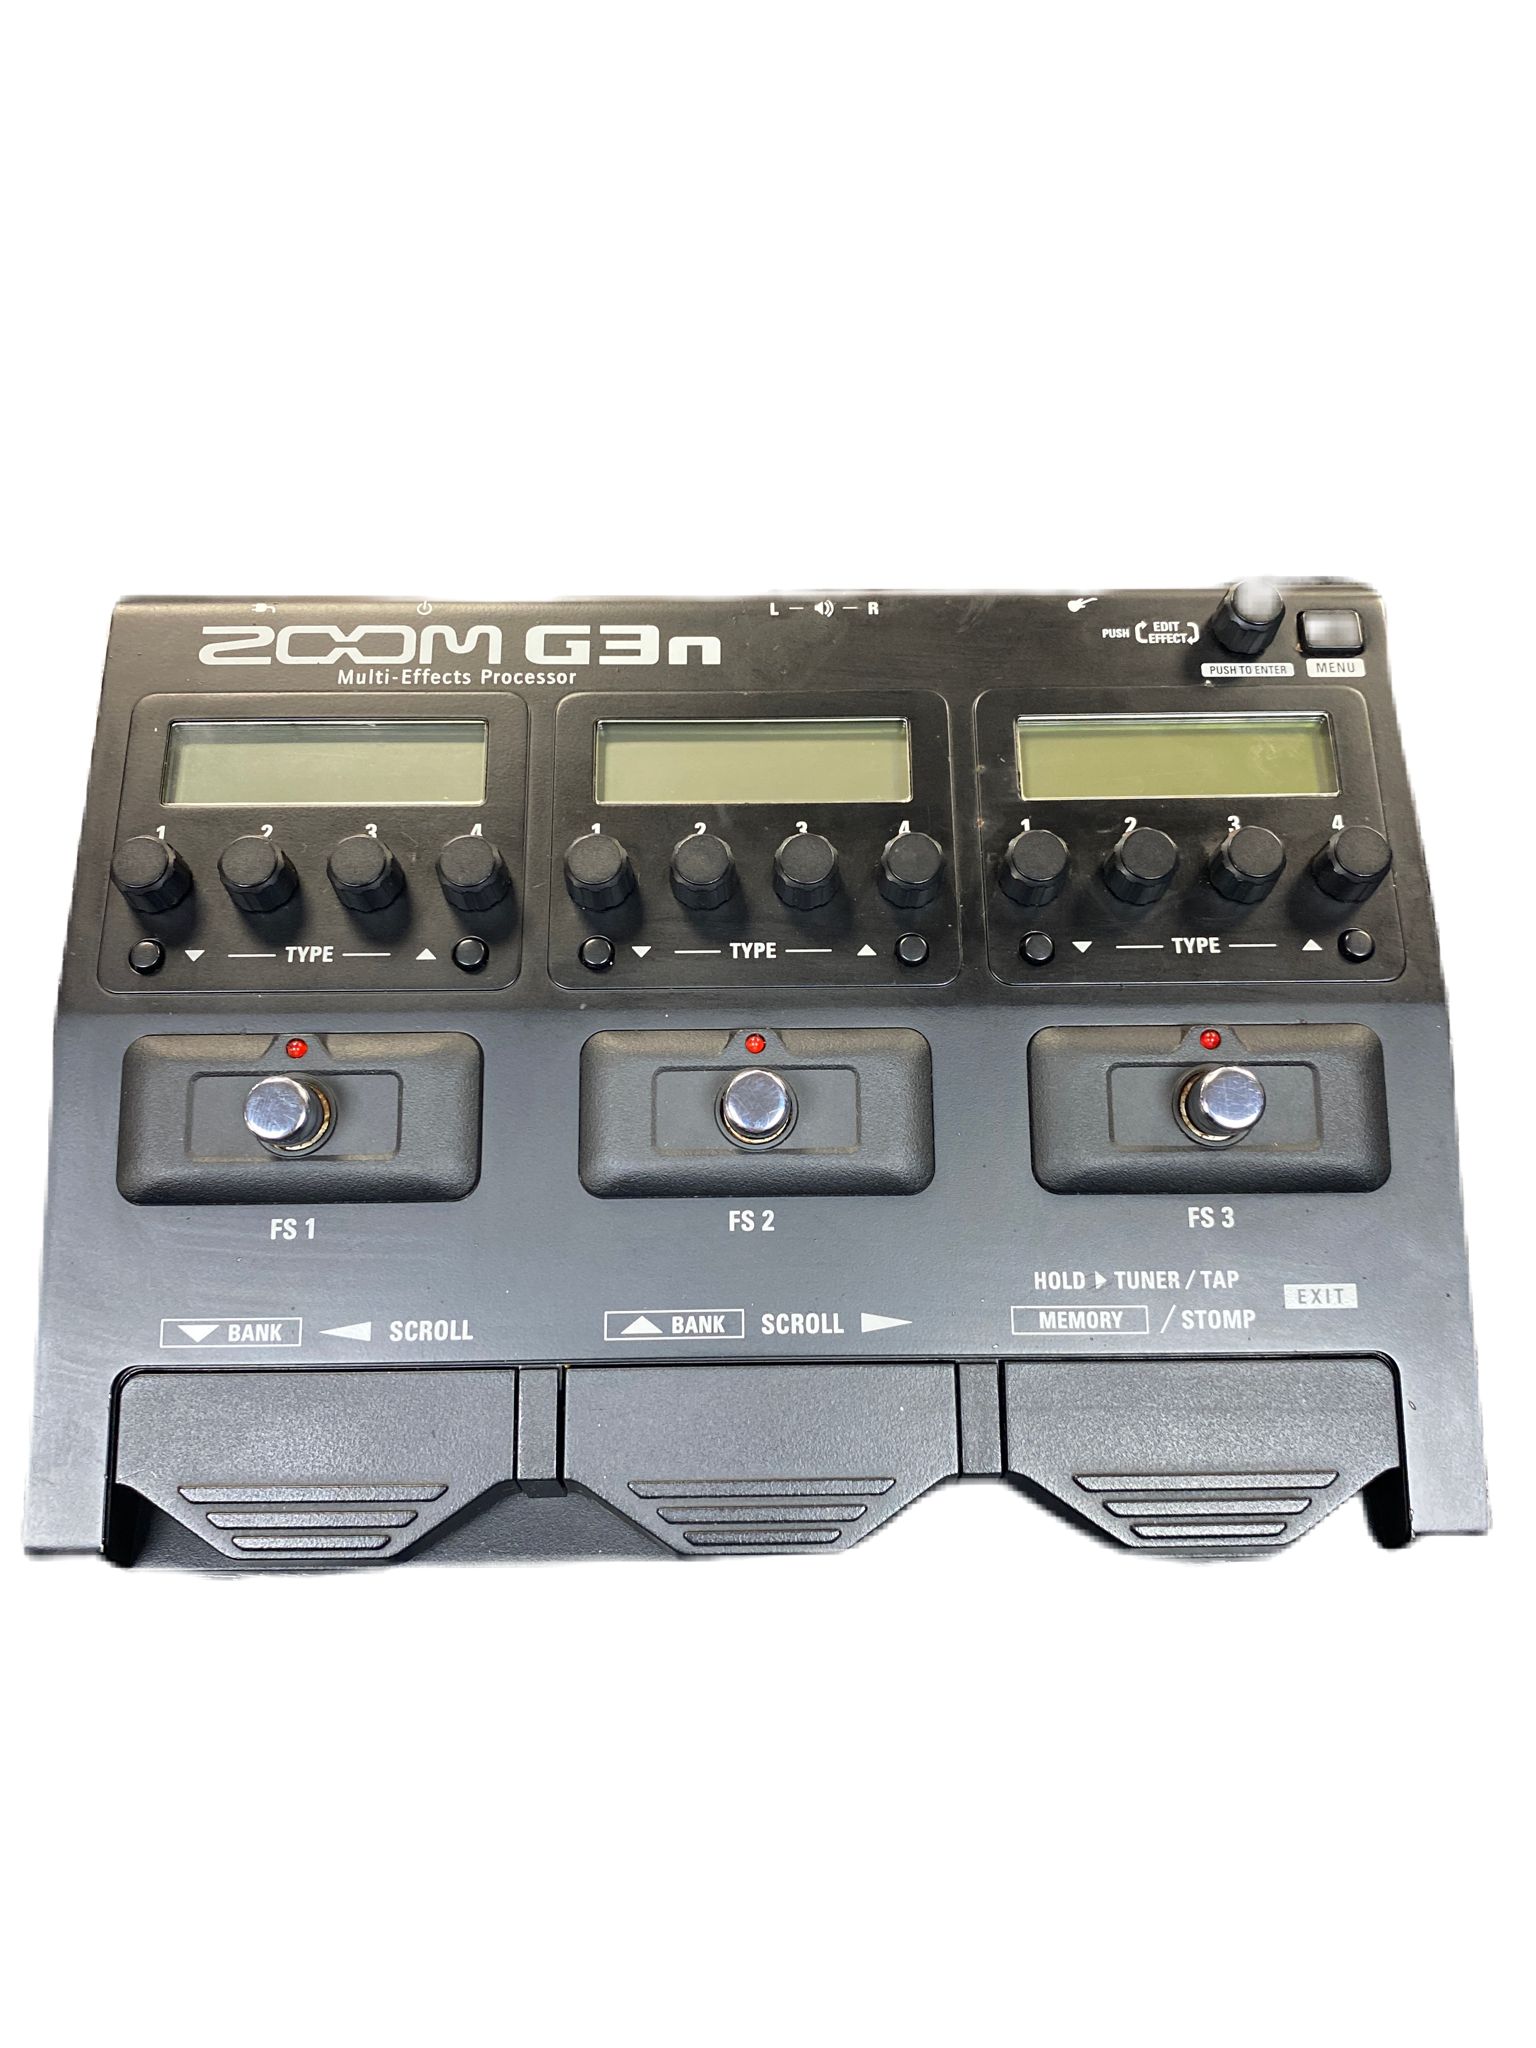 Zoom G3n Multi-Effects Processors for Guitarists